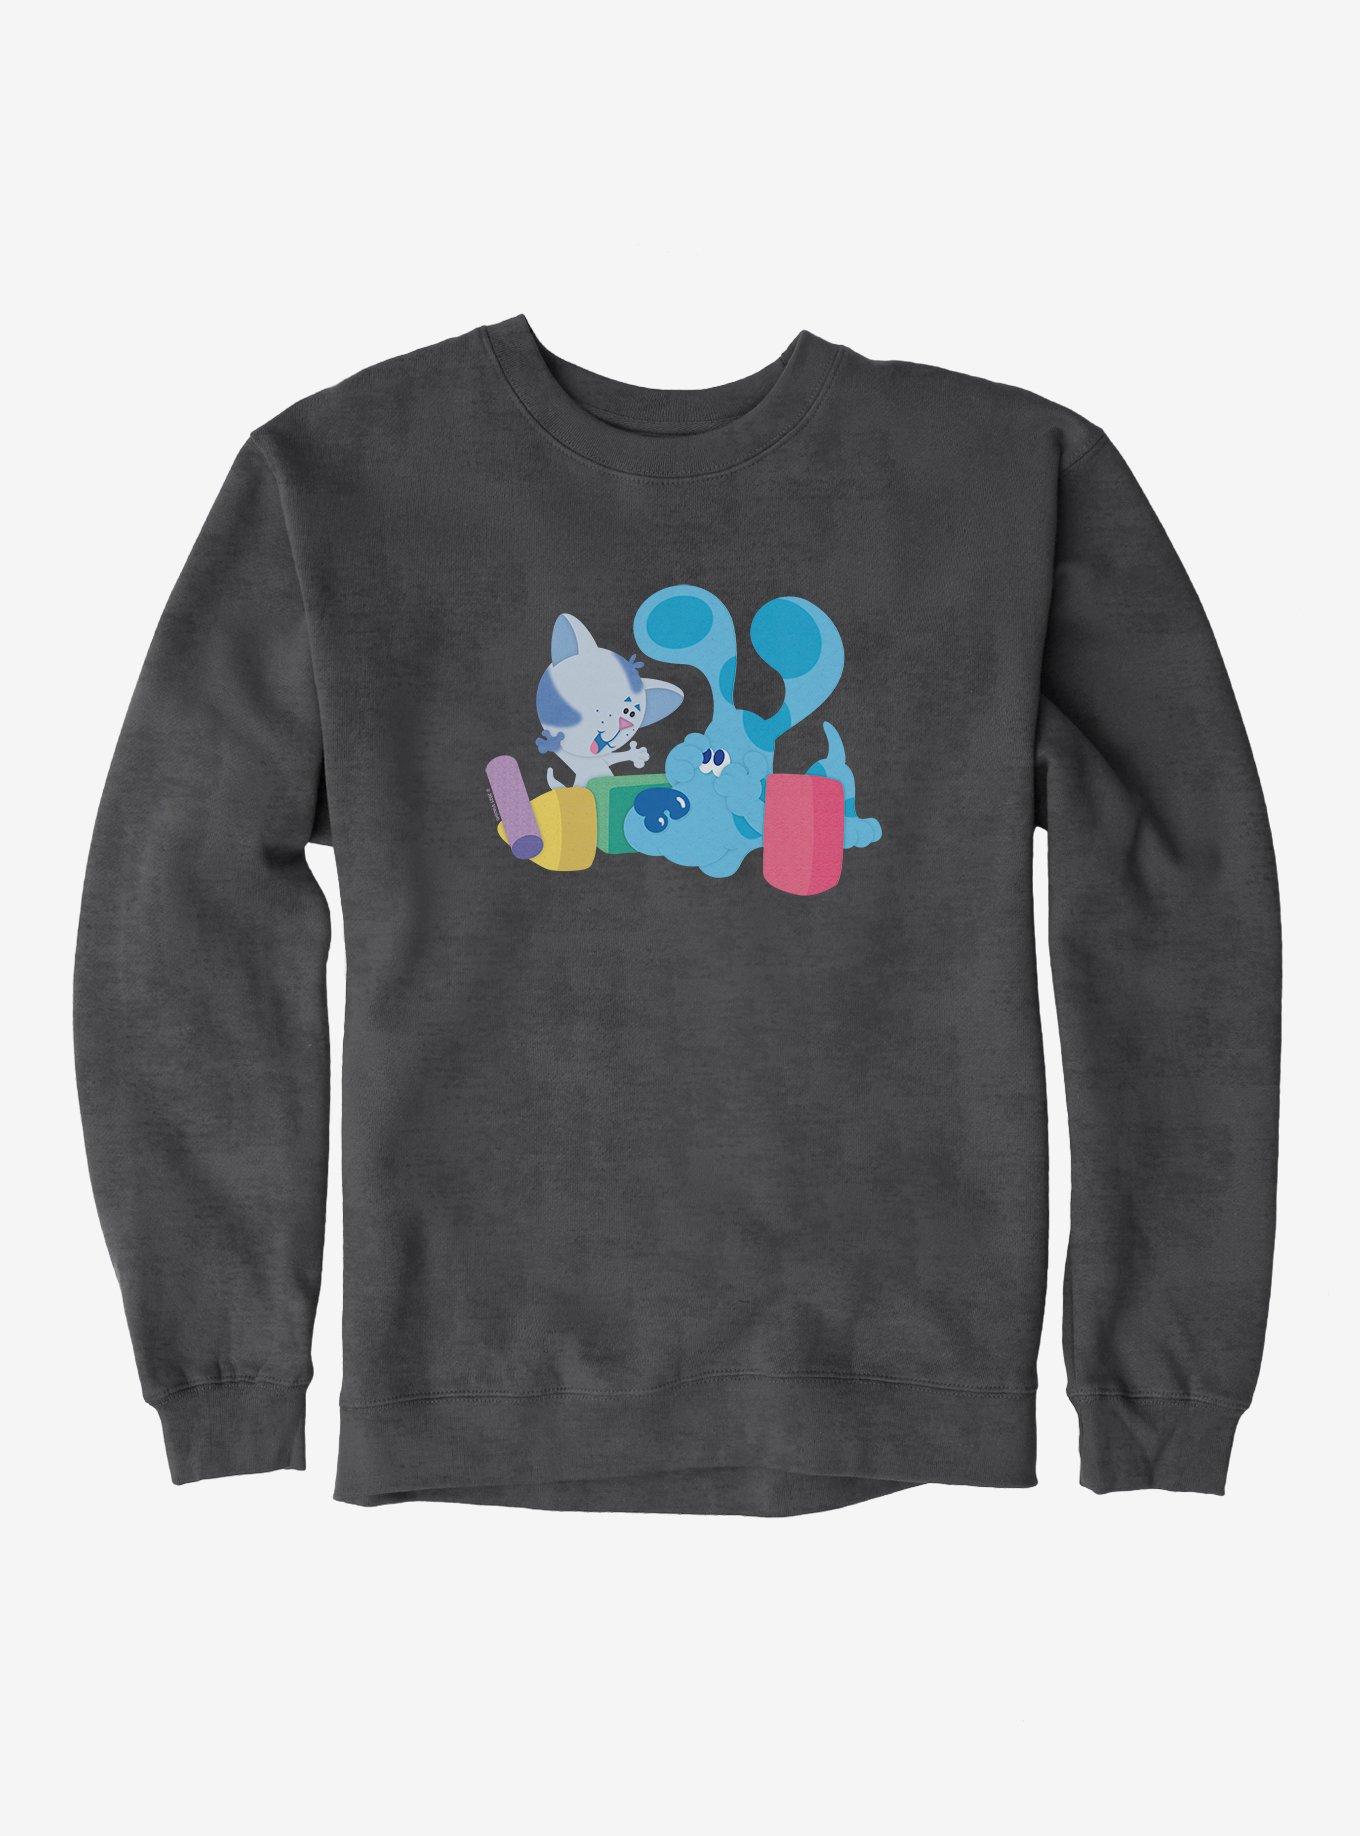 Blue's Clues Periwinkle And Blue Playtime Sweatshirt, CHARCOAL HEATHER, hi-res